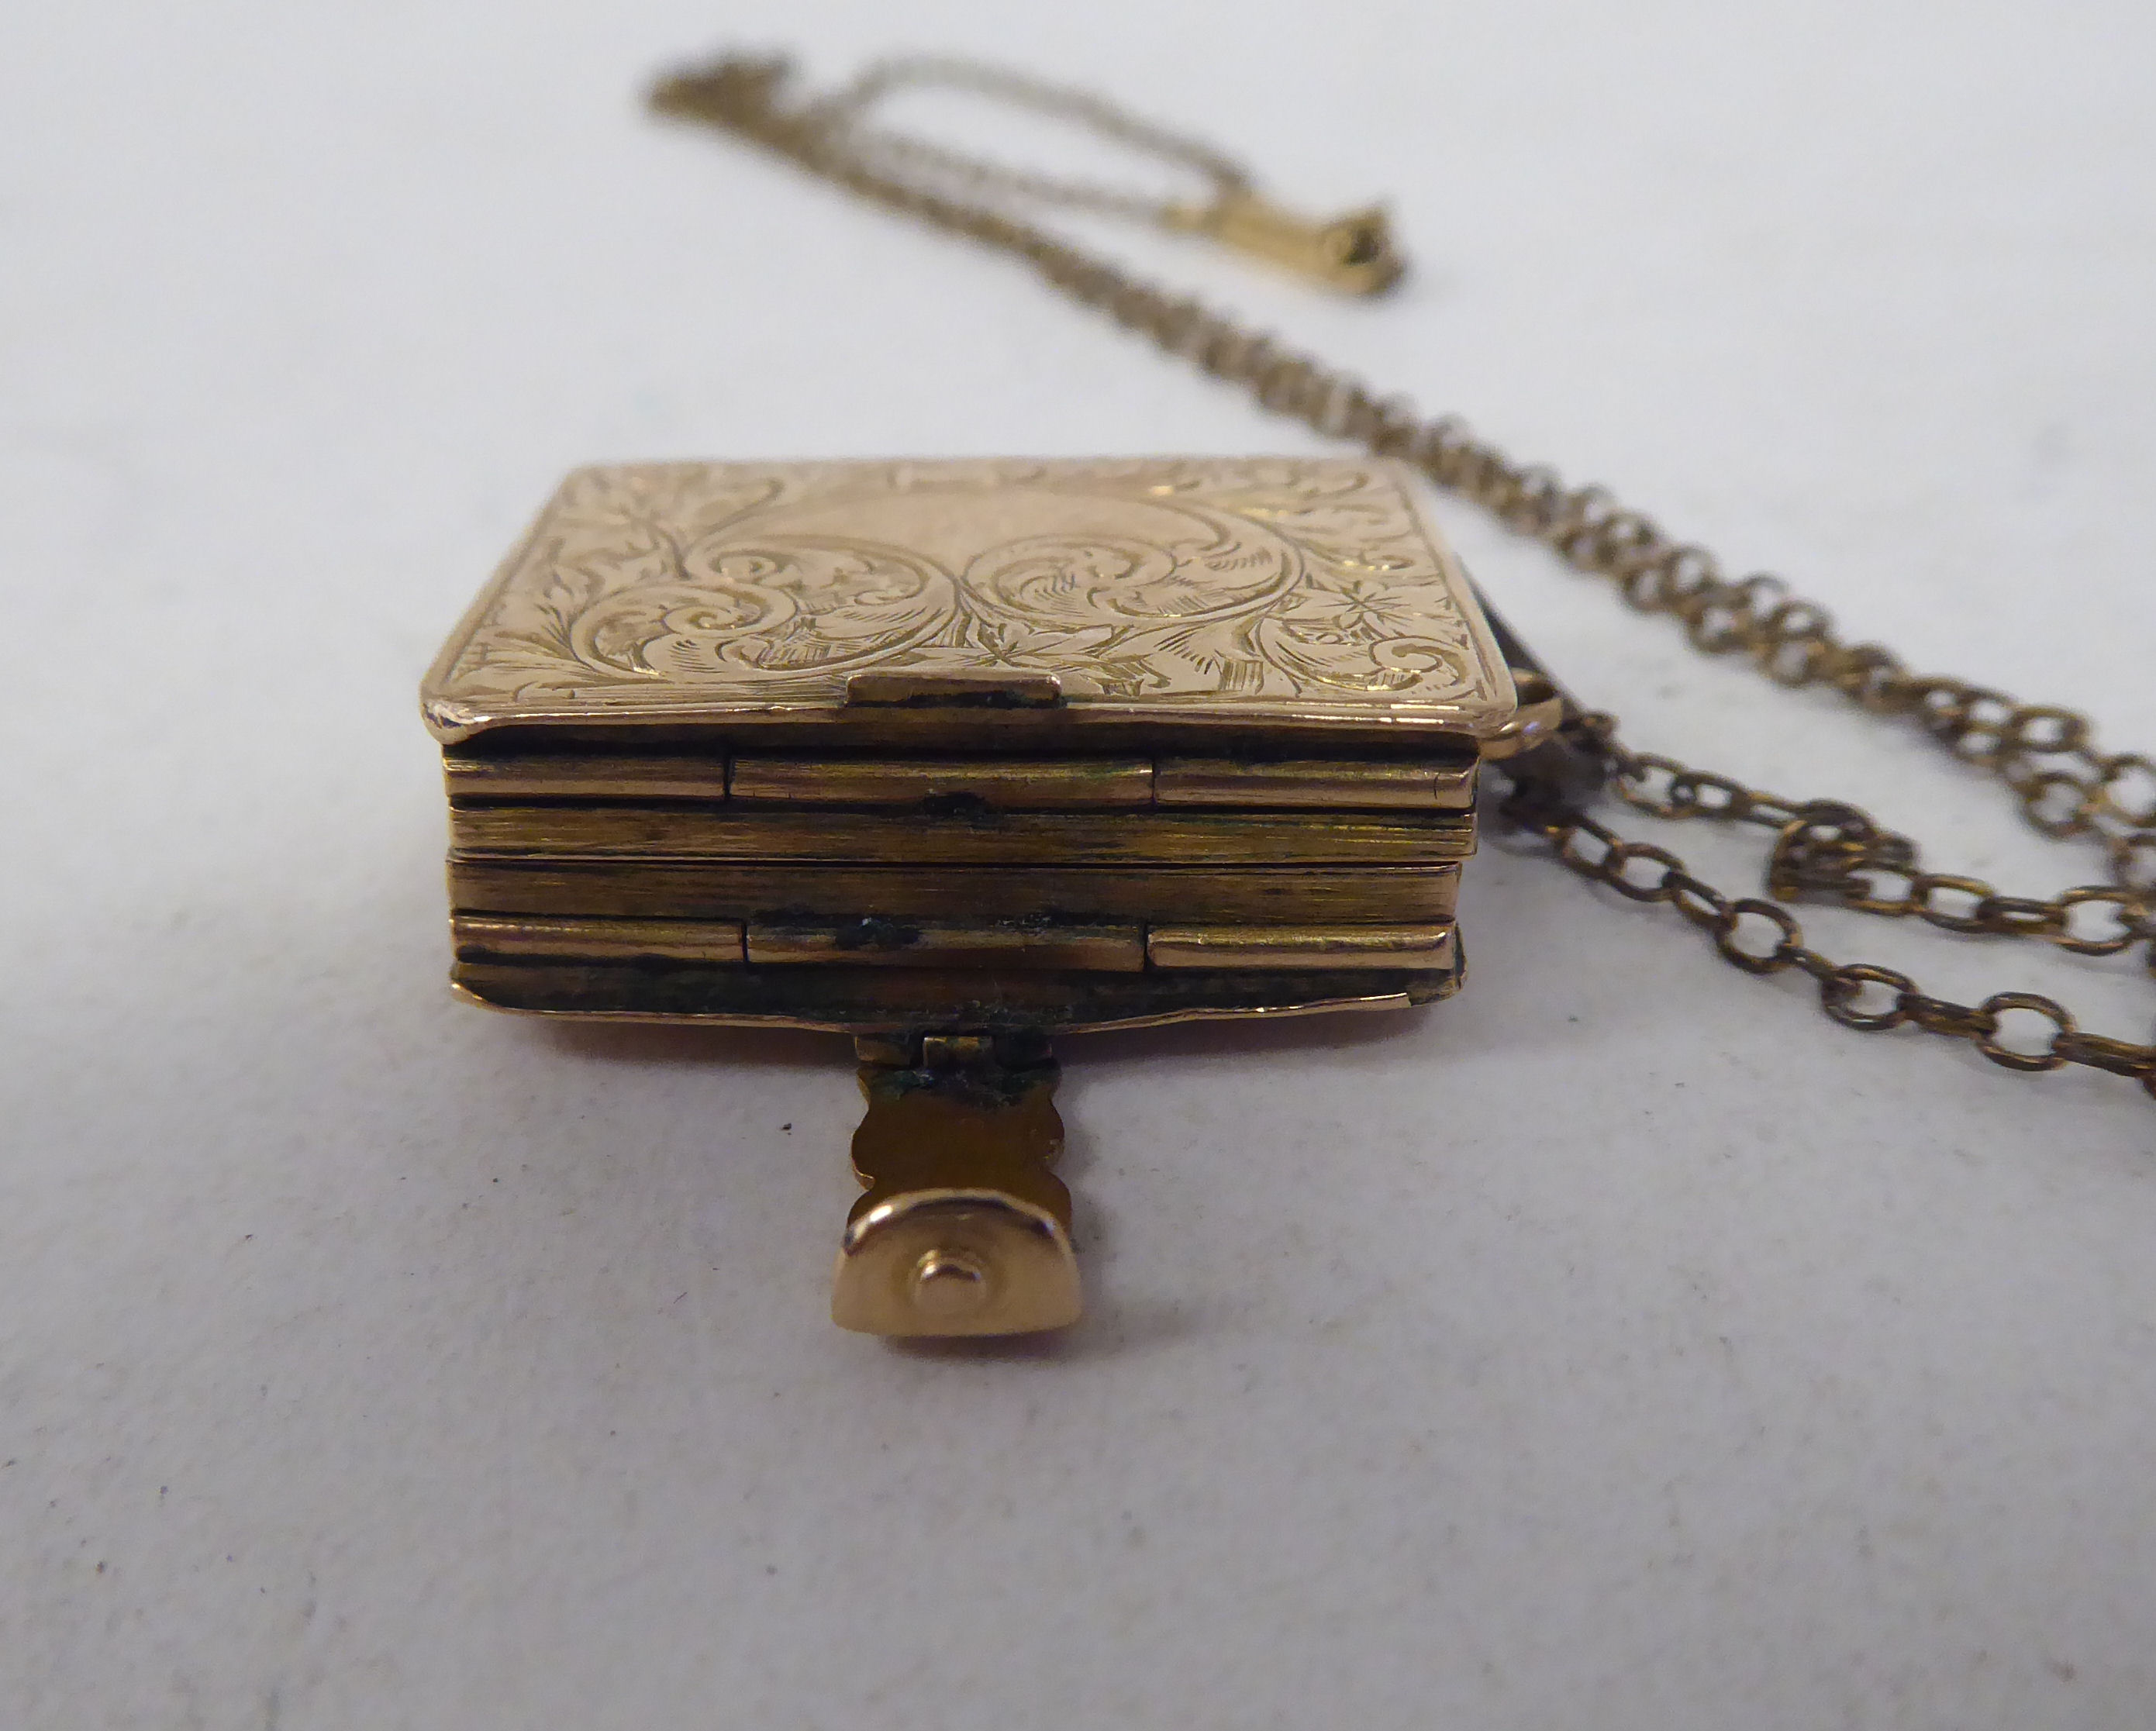 A late Victorian foliate scrolled yellow metal locket, fashioned as a book, on a clasp, revealing - Image 6 of 7